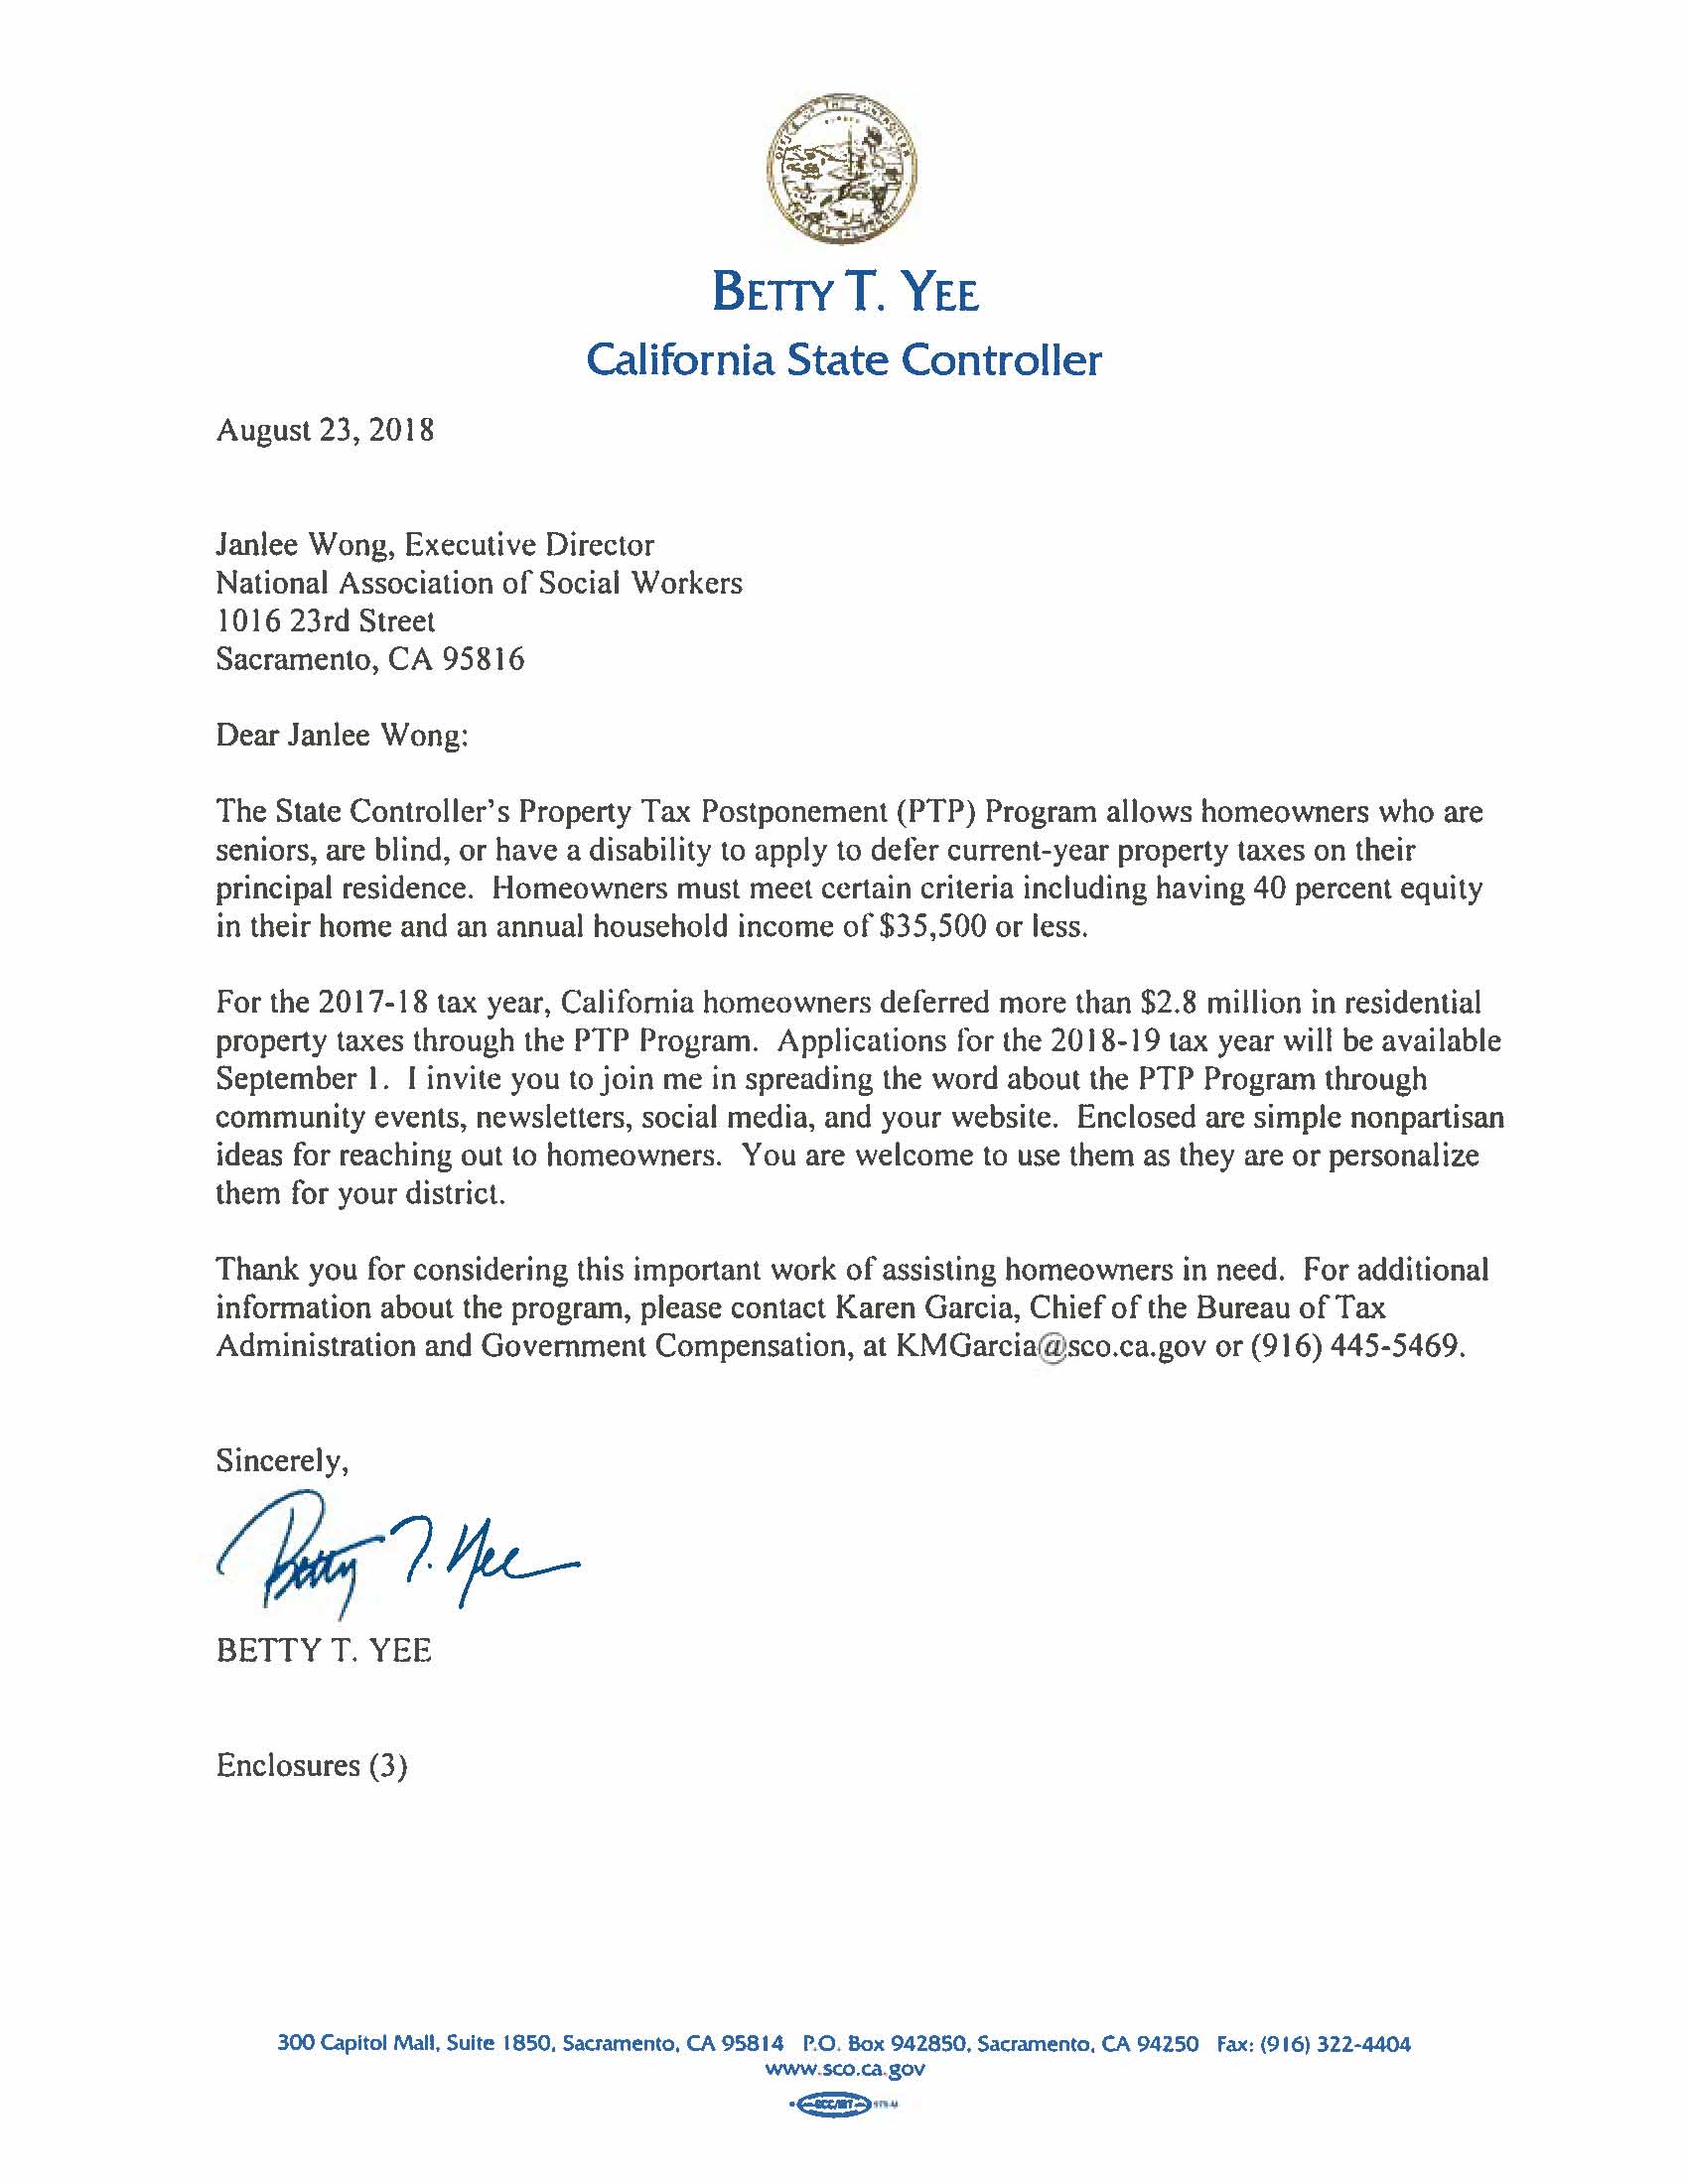 Letter from California State Controller RE Property Tax